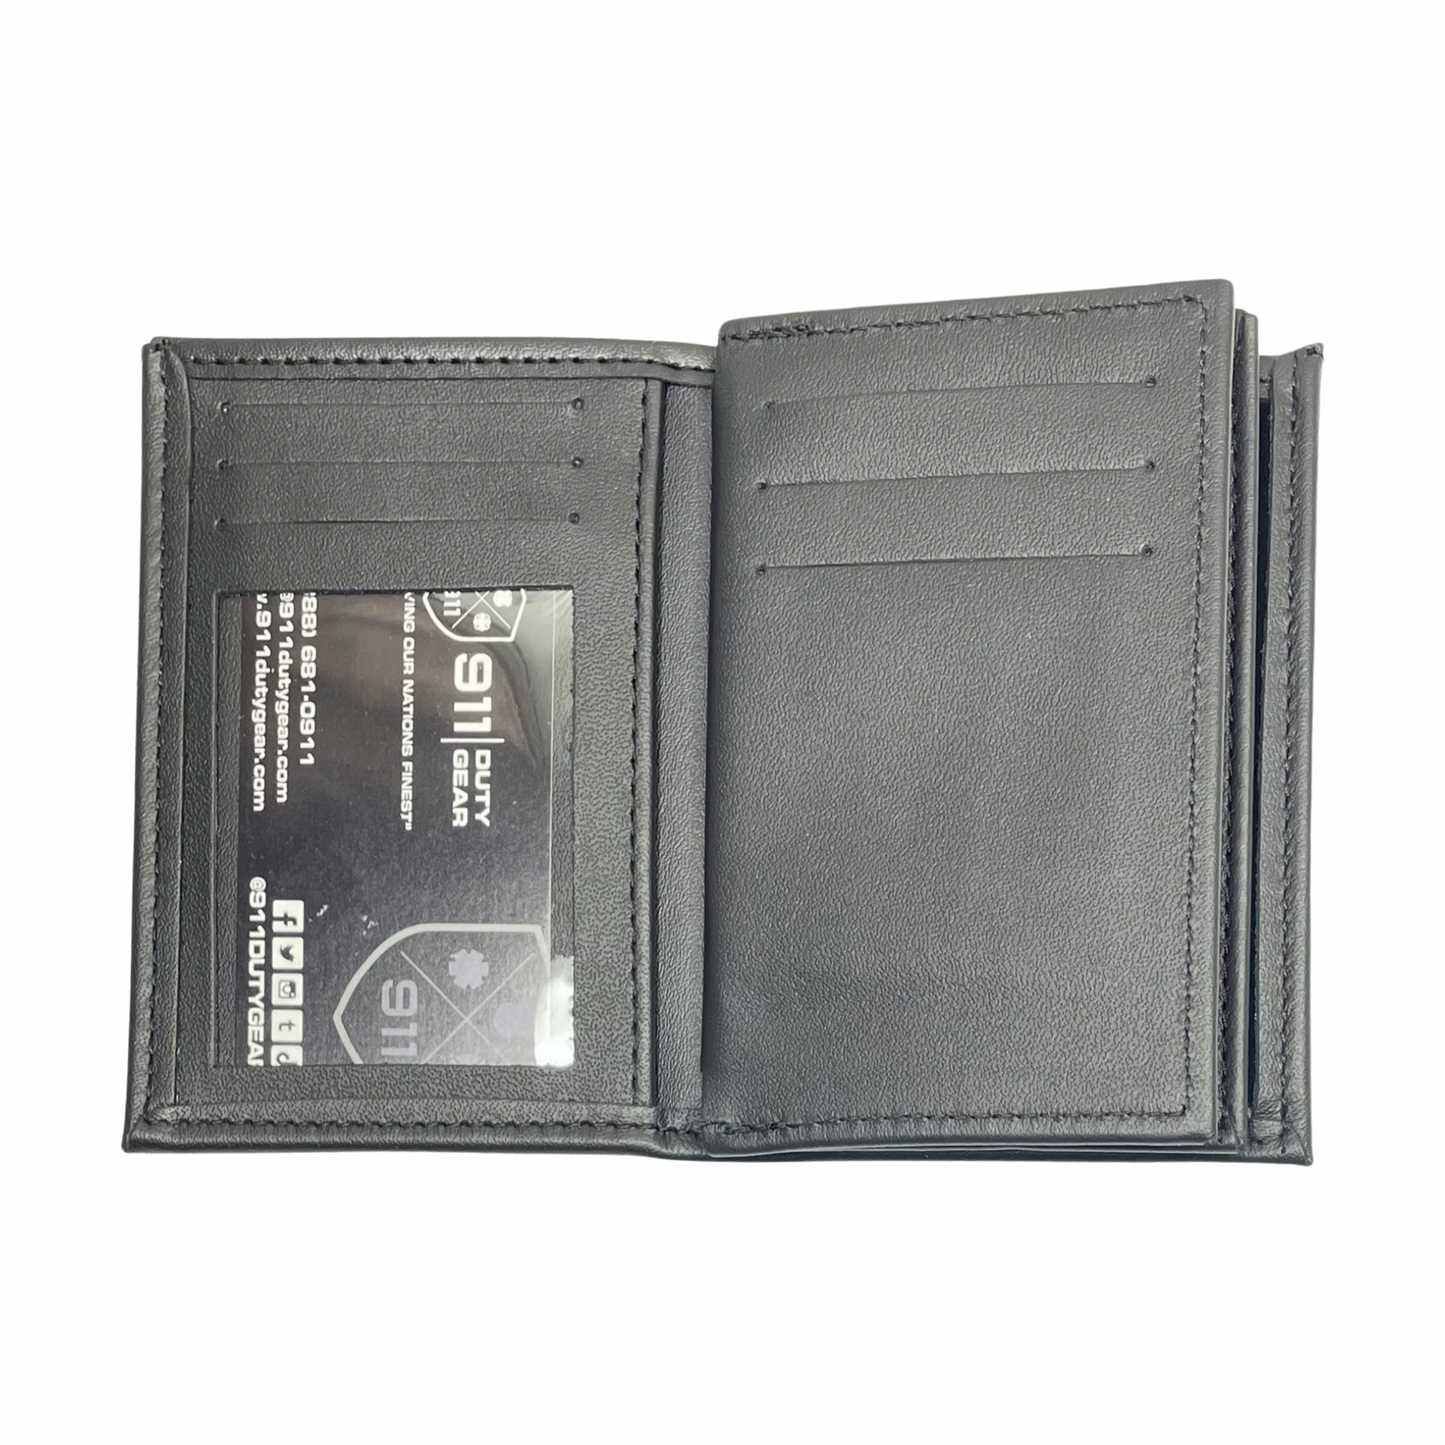 United States Marshals Service (USMS) Horizontal Bifold Double ID Credential & Hidden Badge Wallet-Perfect Fit-911 Duty Gear USA